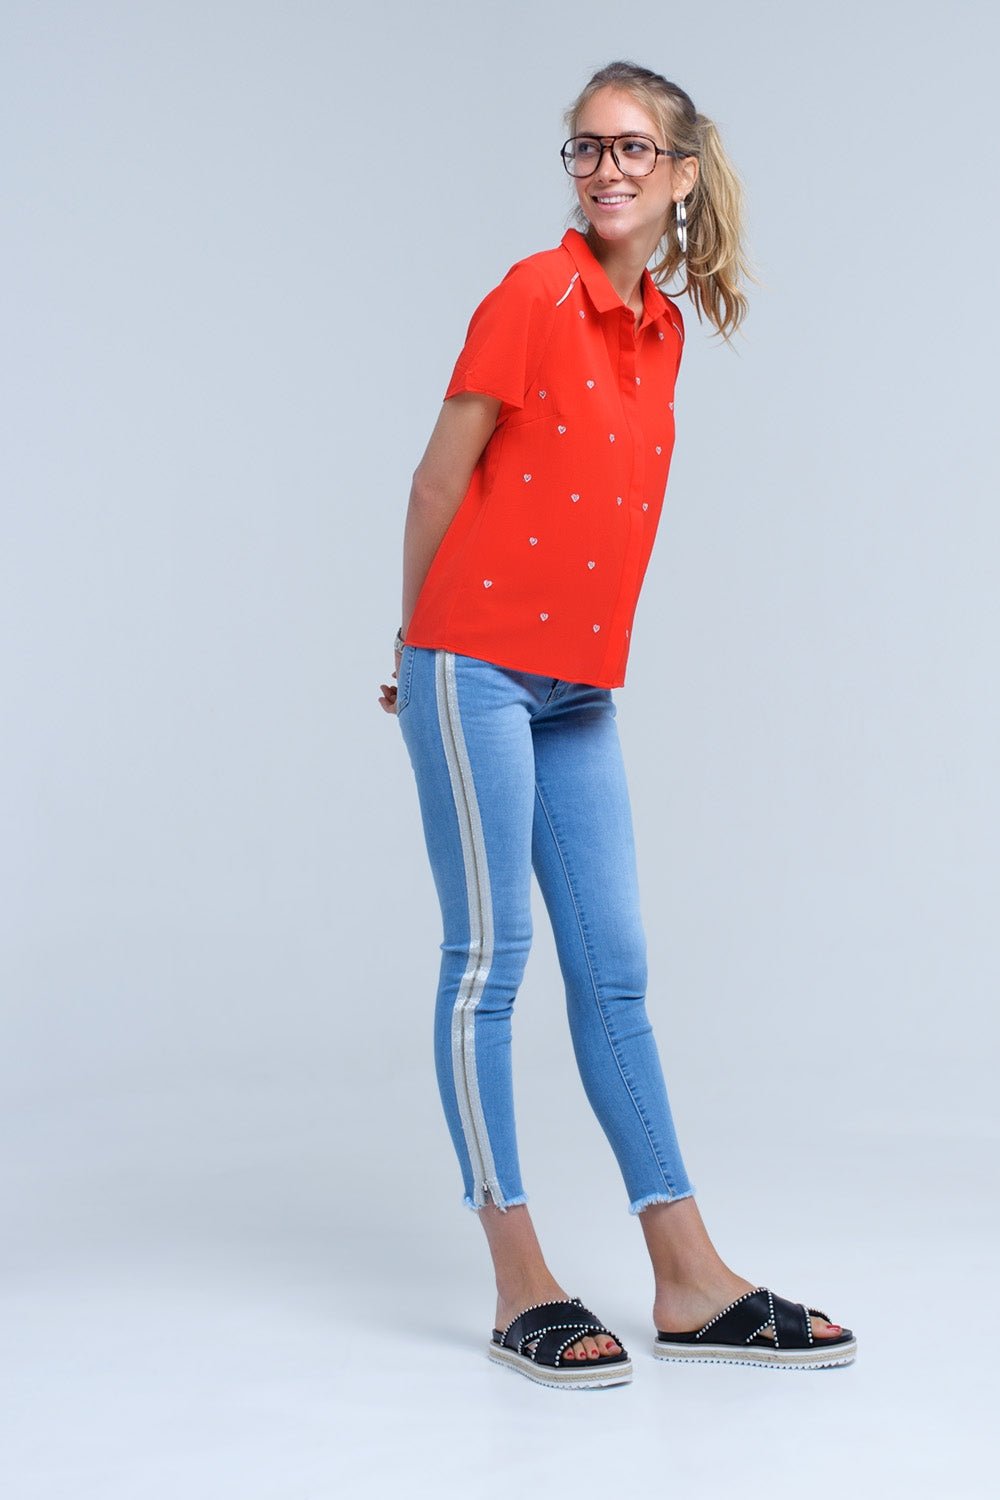 Red Shirt With Heart Embroidery - Mack & Harvie